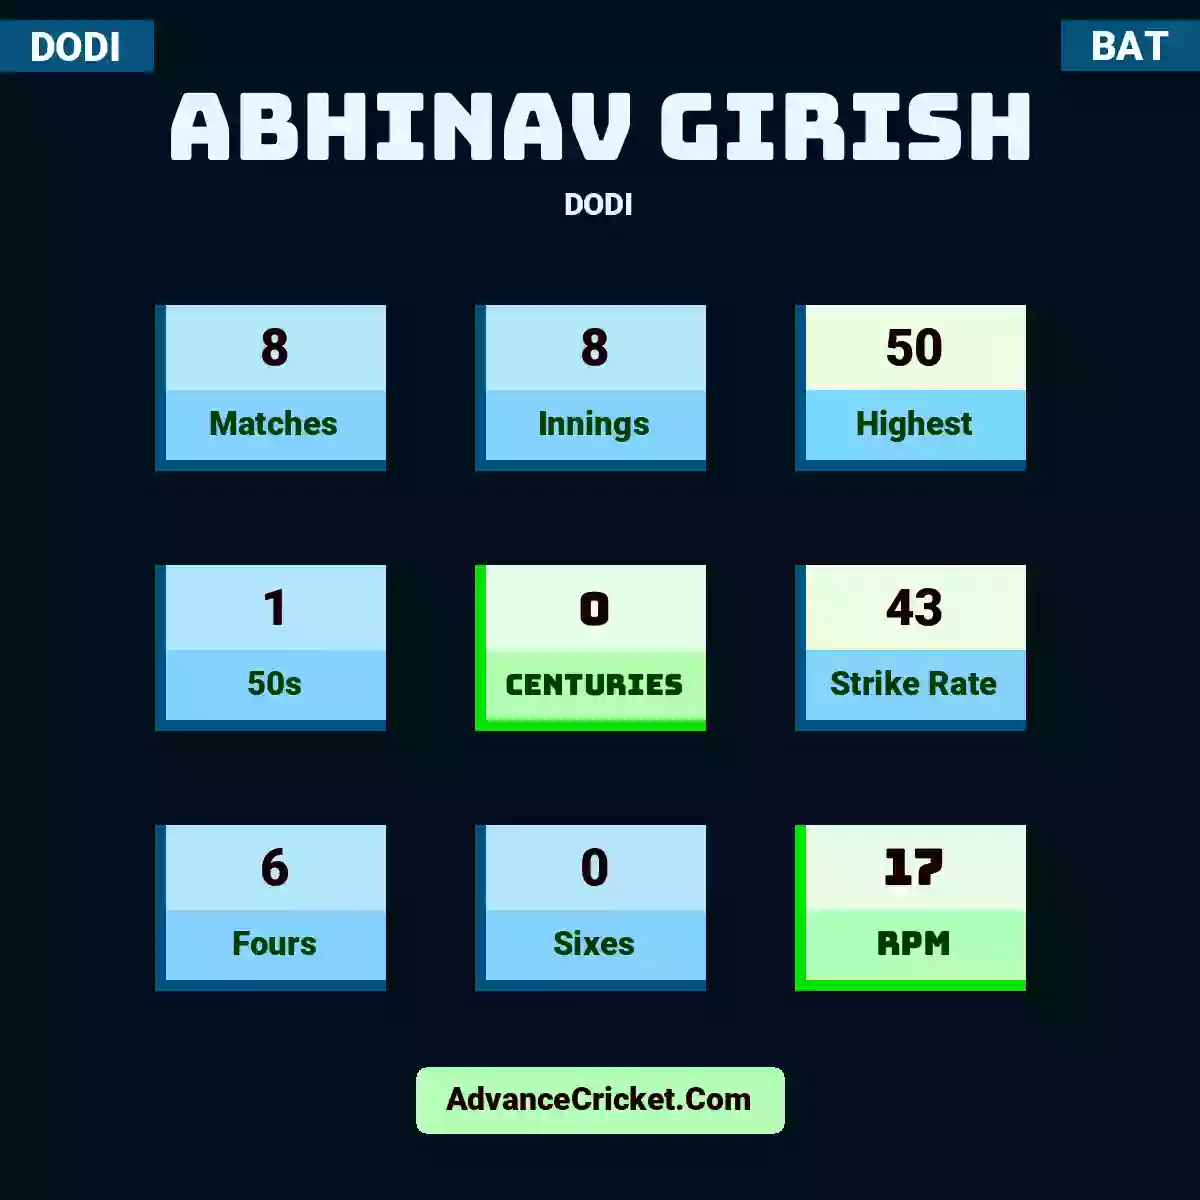 Abhinav Girish DODI , Abhinav Girish played 8 matches, scored 50 runs as highest, 1 half-centuries, and 0 centuries, with a strike rate of 43. A.Girish hit 6 fours and 0 sixes, with an RPM of 17.